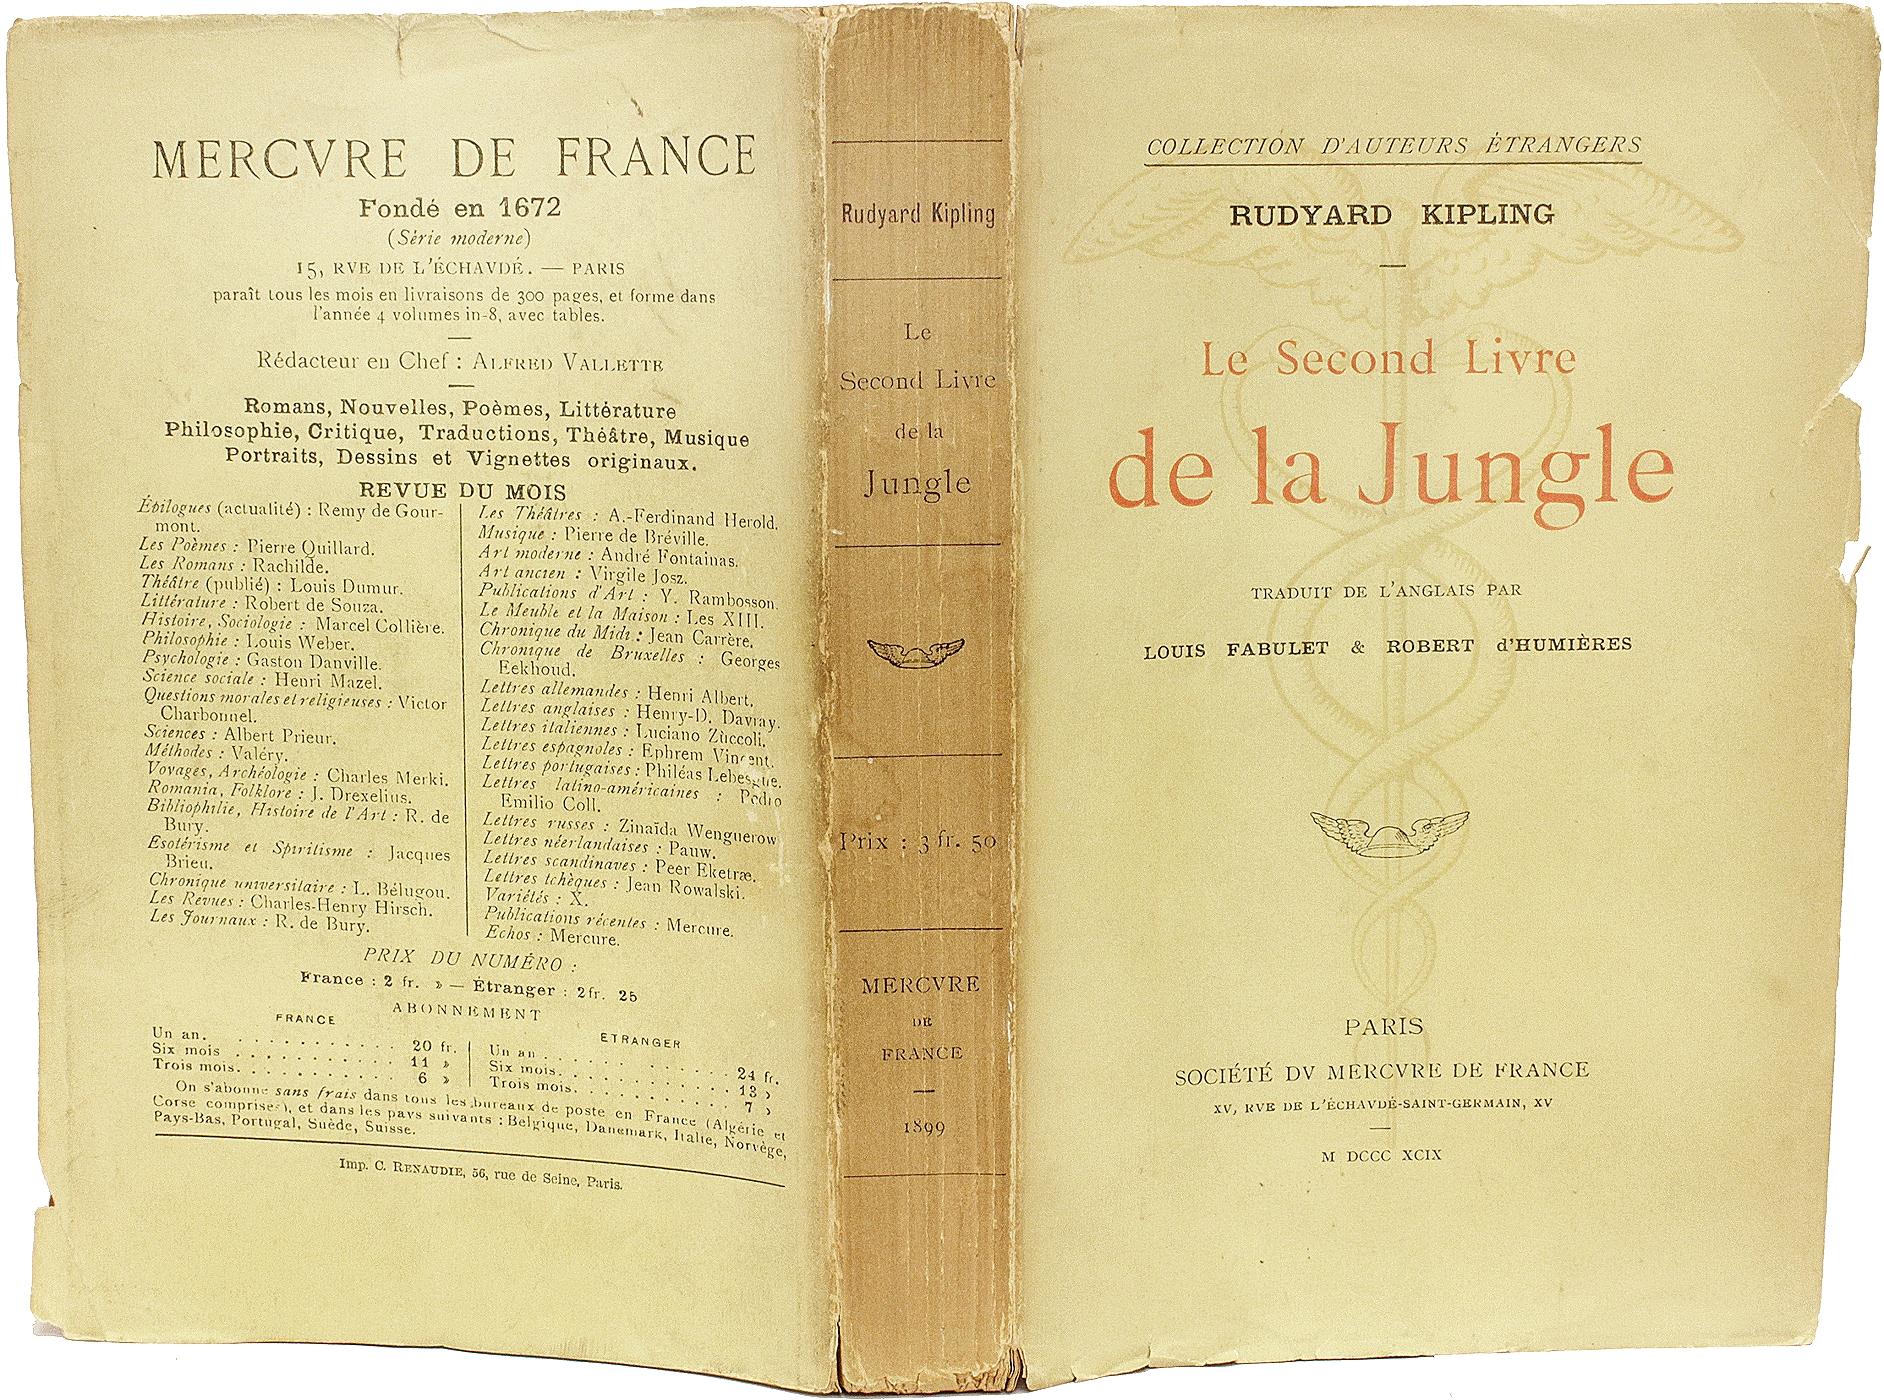 Fabric KIPLING. Le Livre de la Jungle. FOURTH & FIRST FRENCH EDITIONS - BOTH INSCRIBED! For Sale